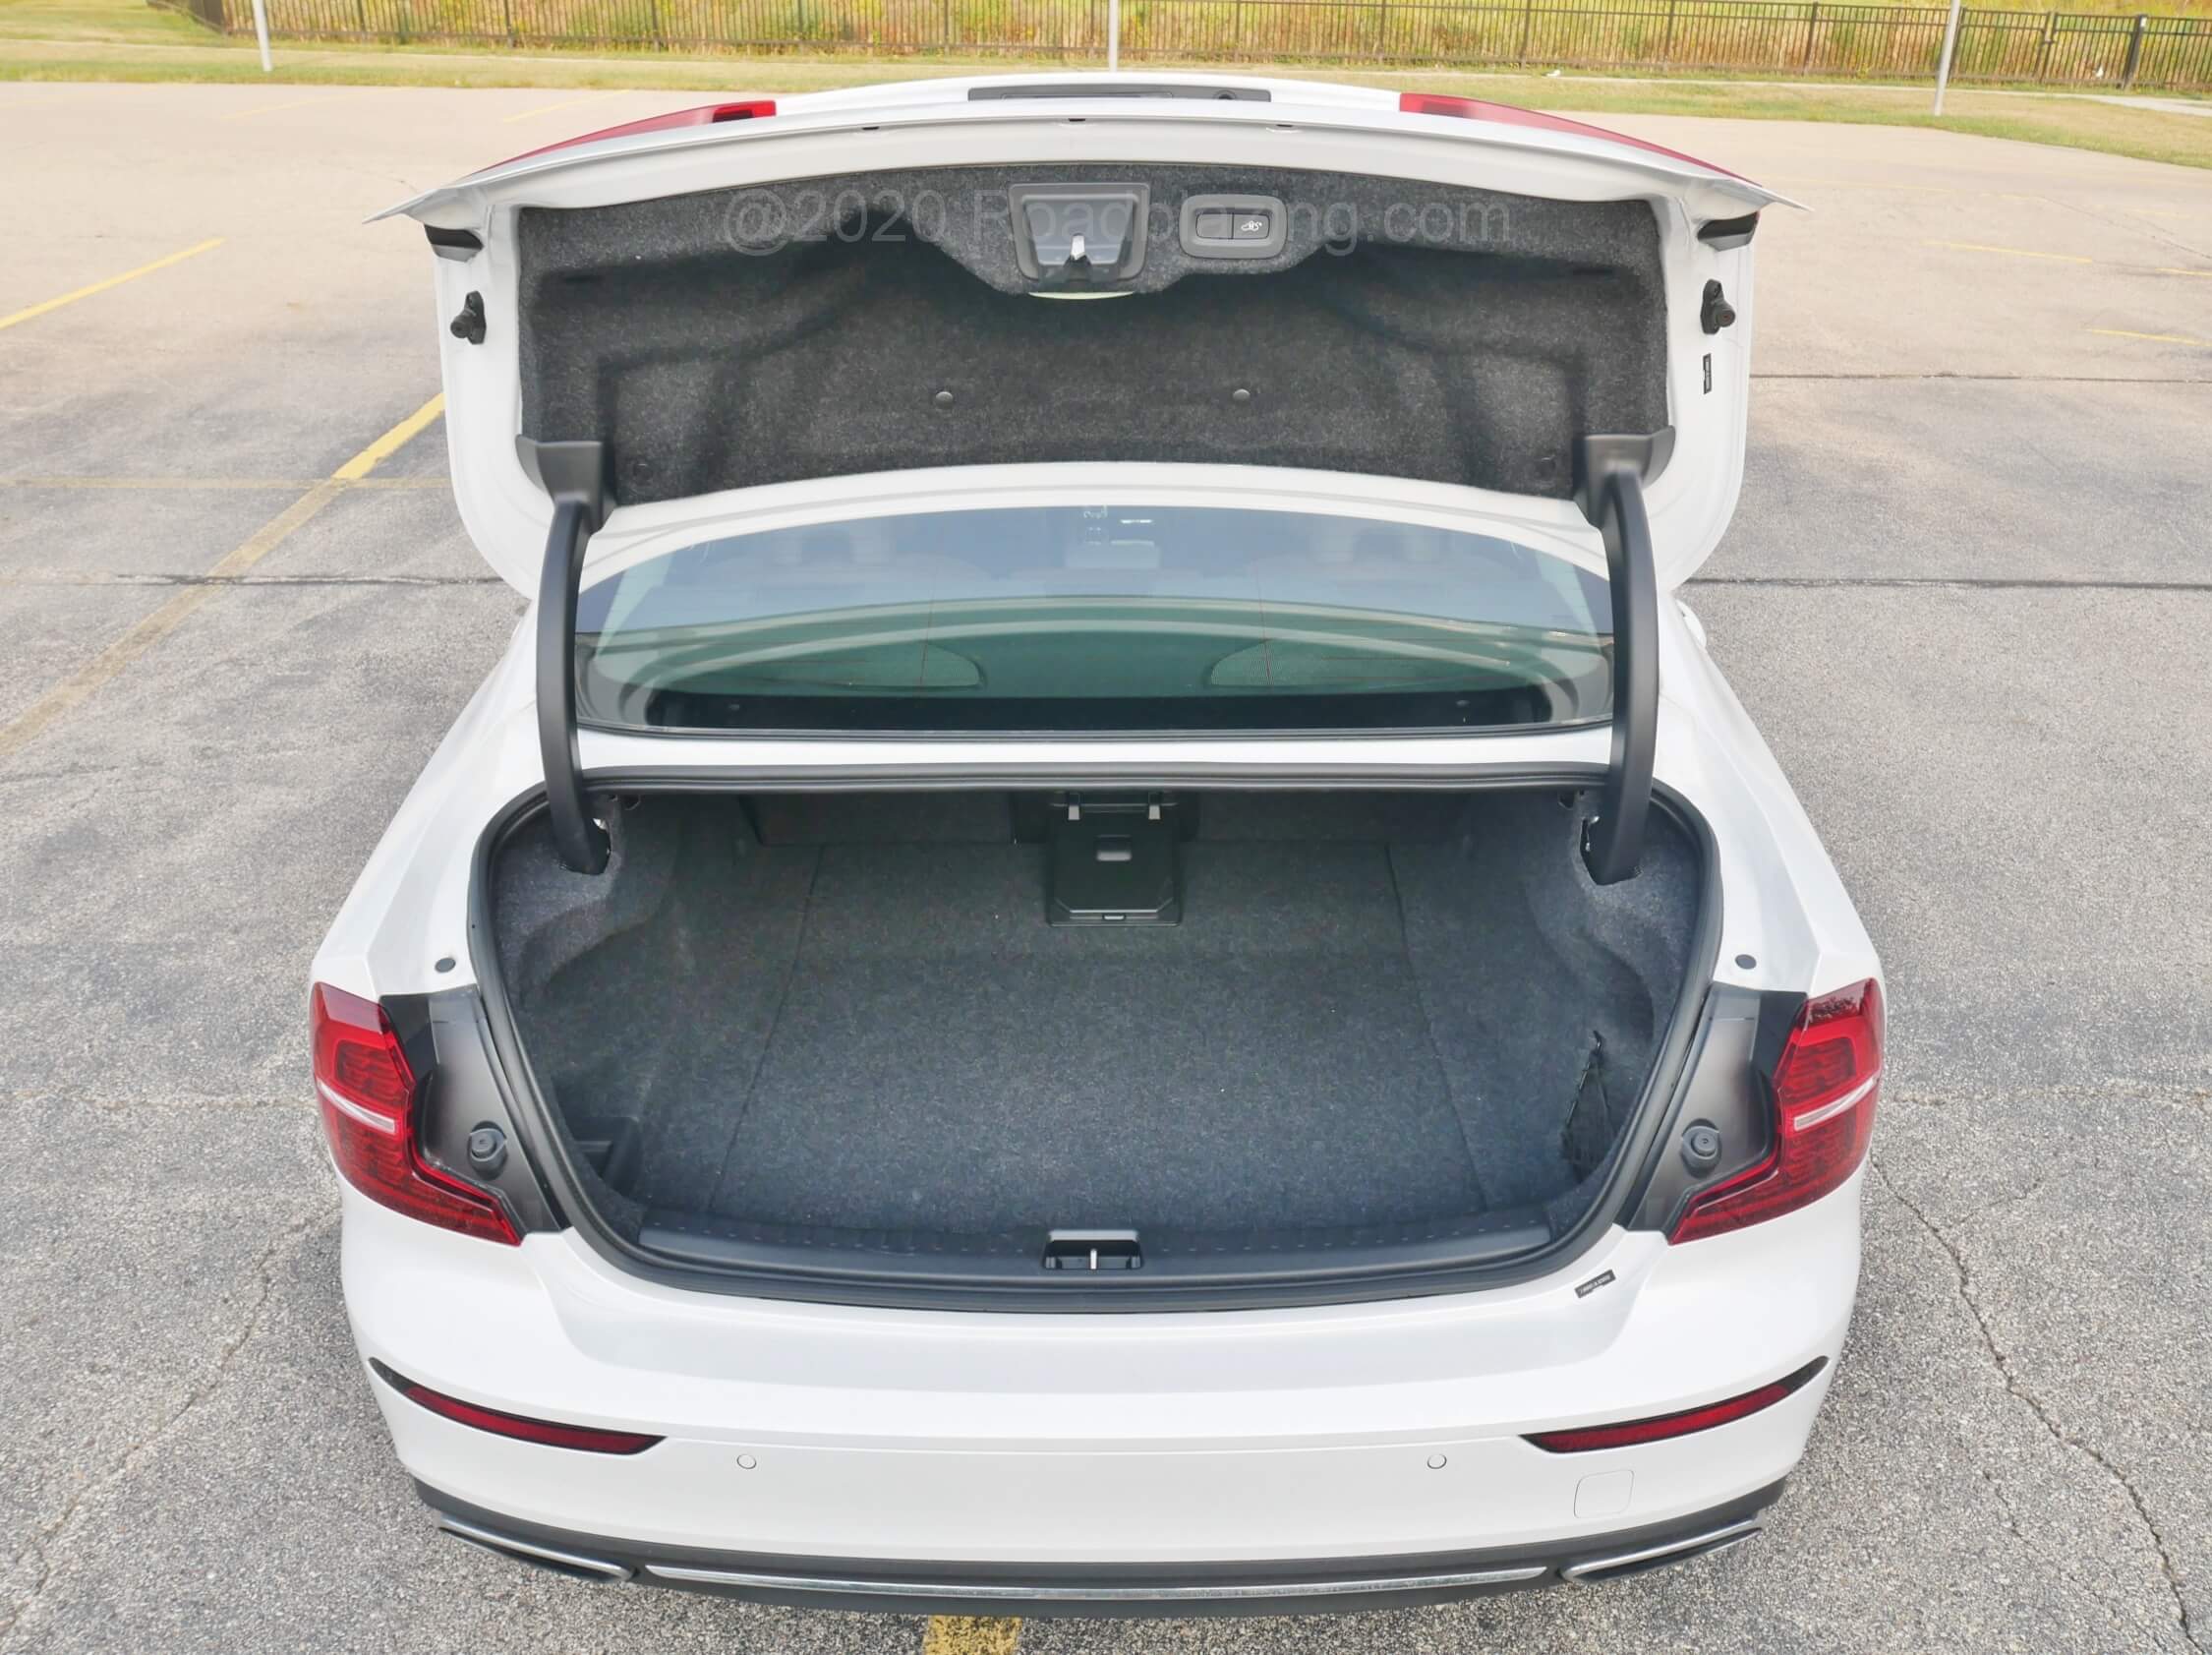 2020 Volvo S60 T8 AWD PHEV: decent sized trunk compromised by higher load sill and lack of folding rear seatbacks